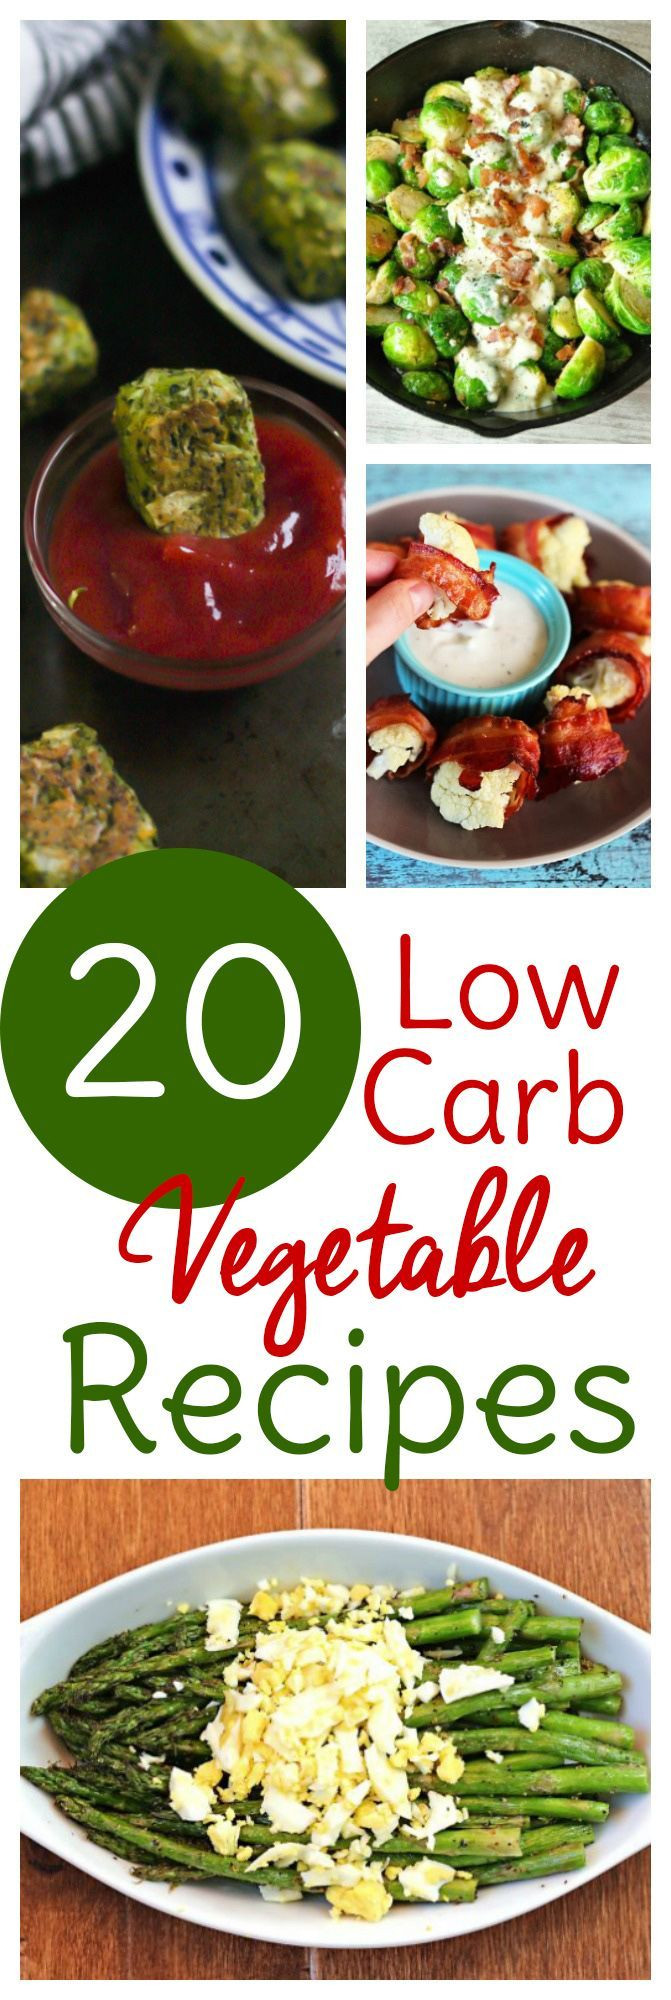 Low Carb Vegetables Recipes
 1316 best images about Side Dishes & Salads on Pinterest